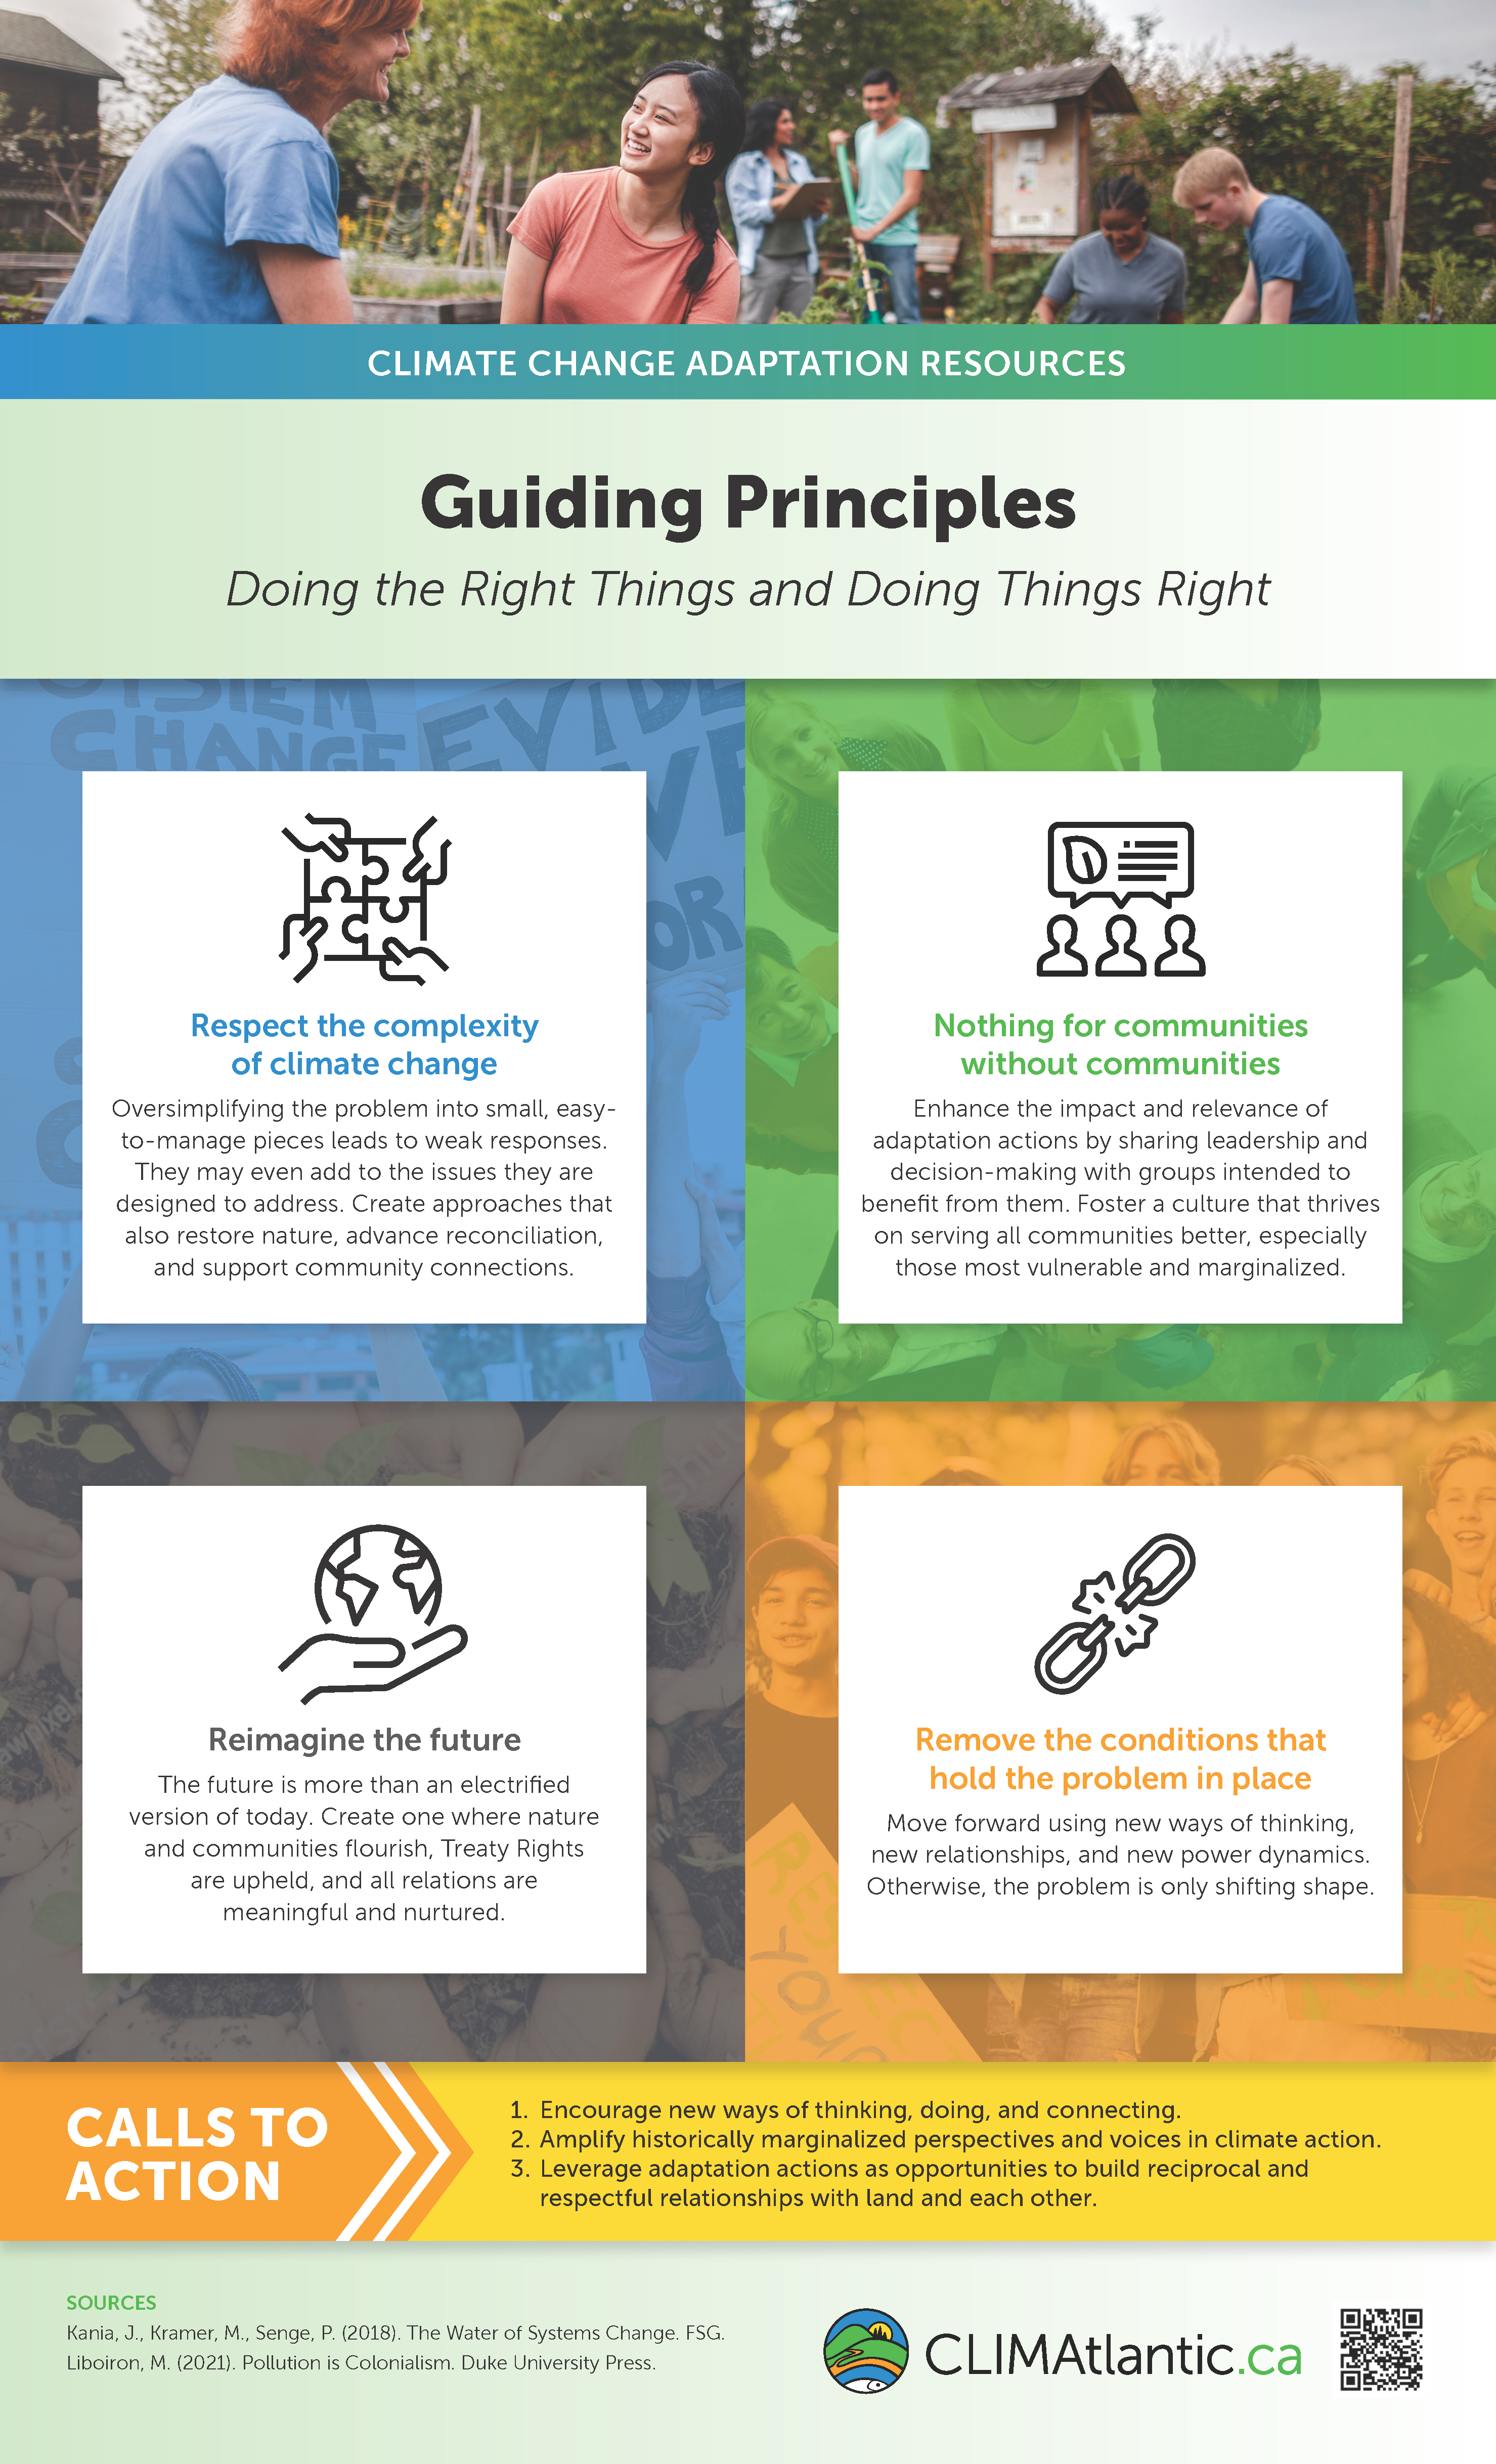 An infographic explaining the guiding principles CLIMAtlantic strives to use to meaningfully adapt to climate change.